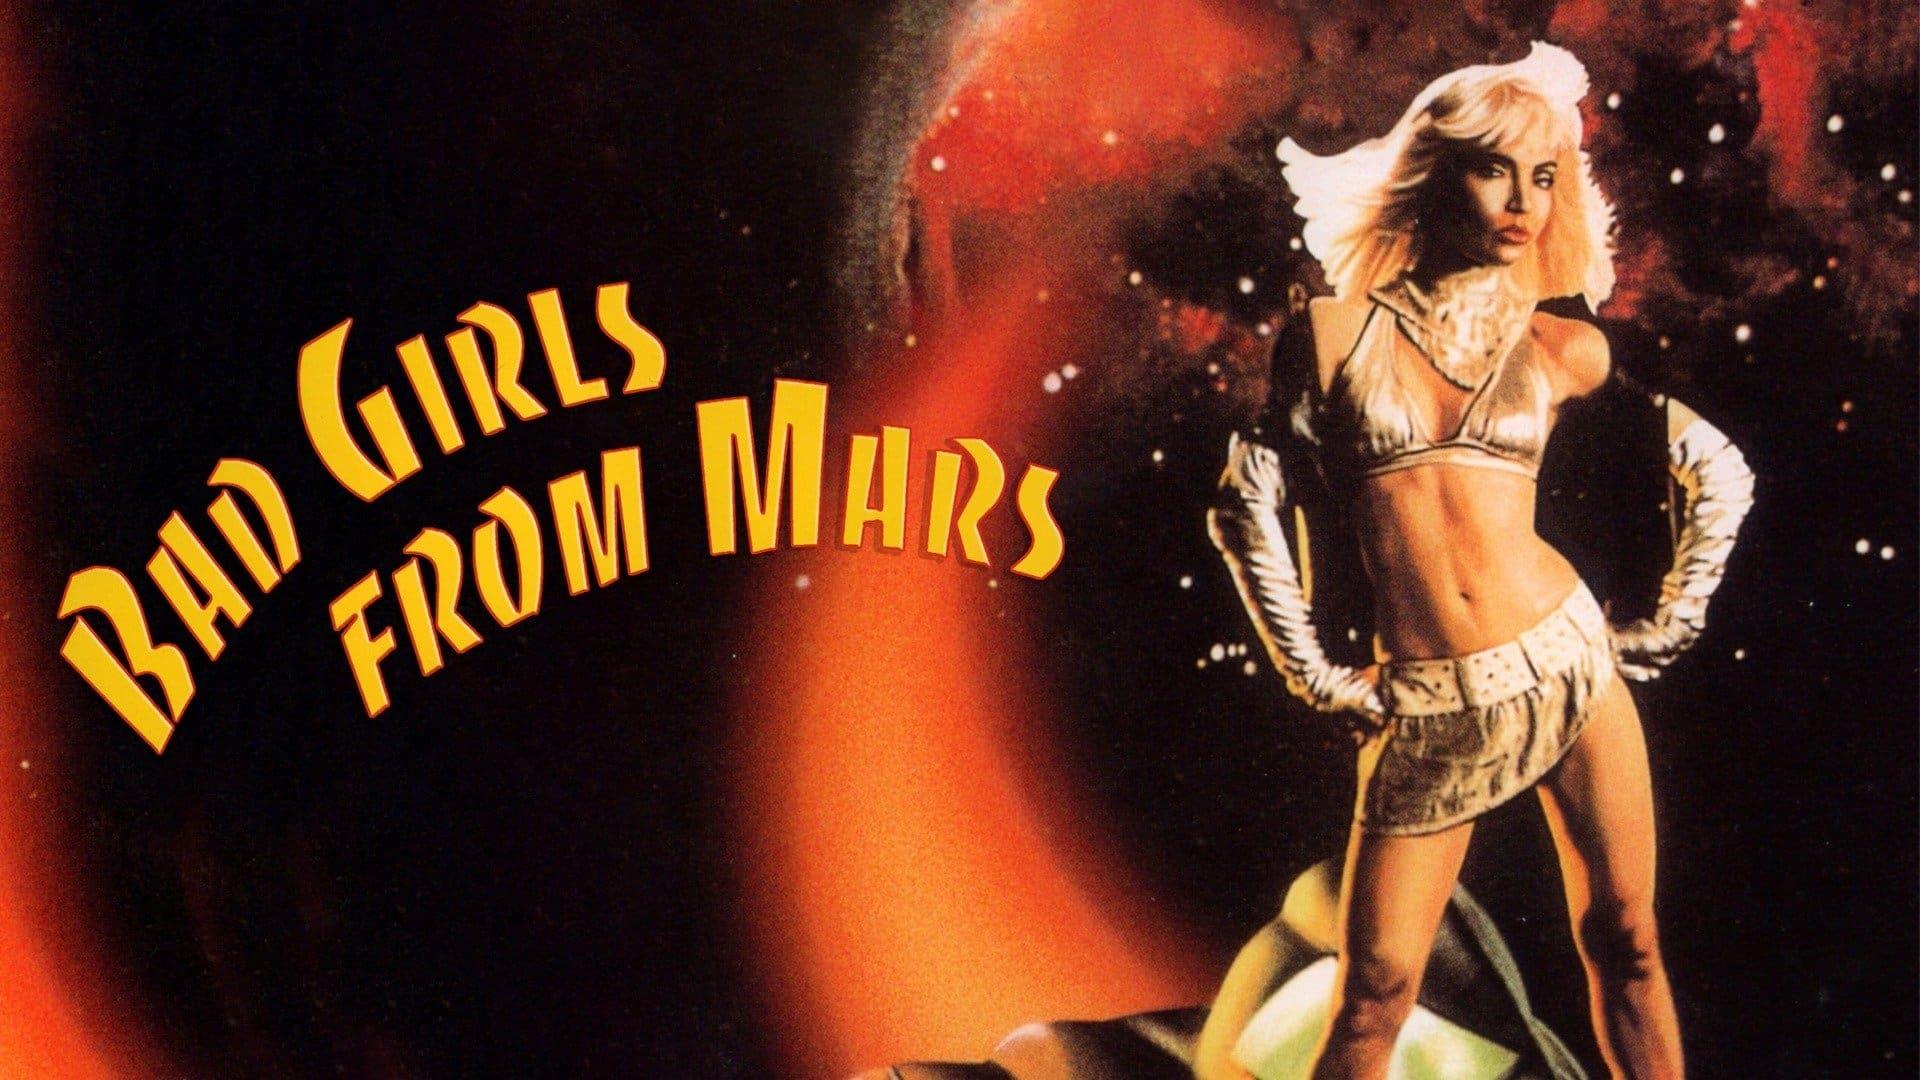 Bad Girls from Mars backdrop